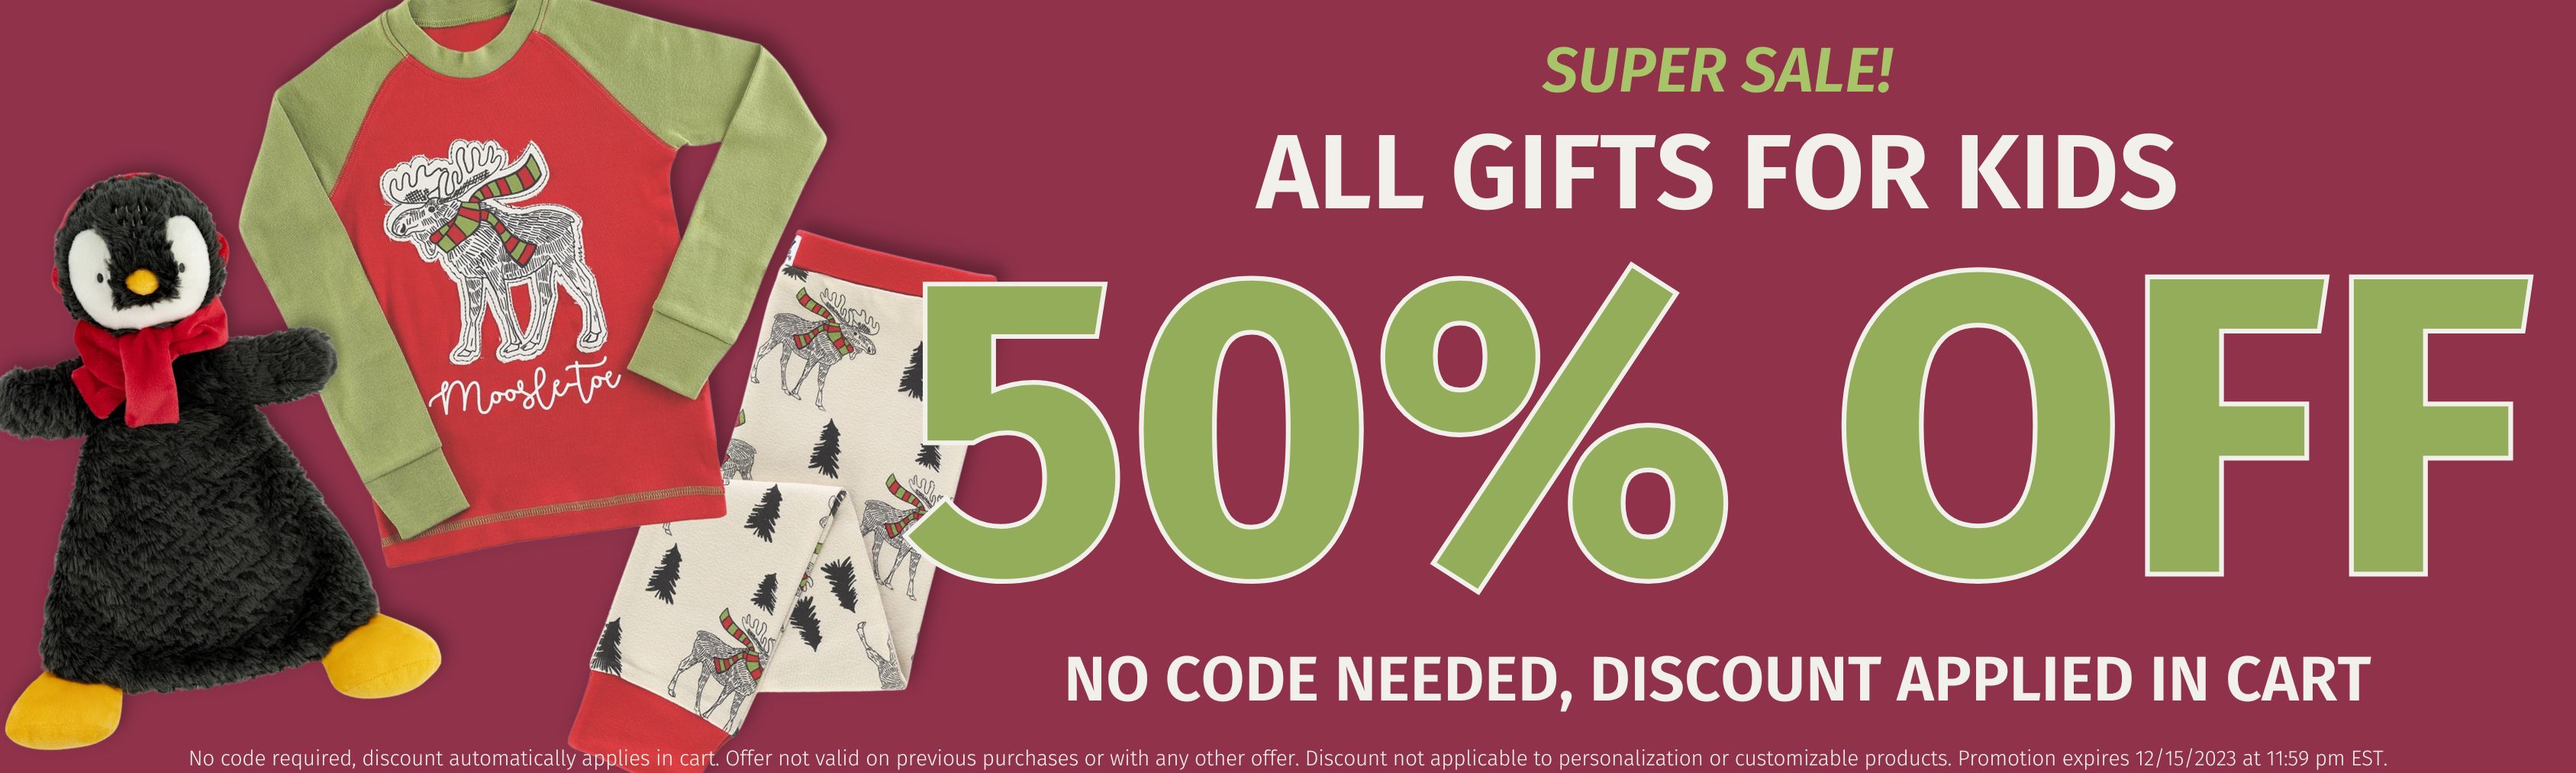 50% off gifts for kids!